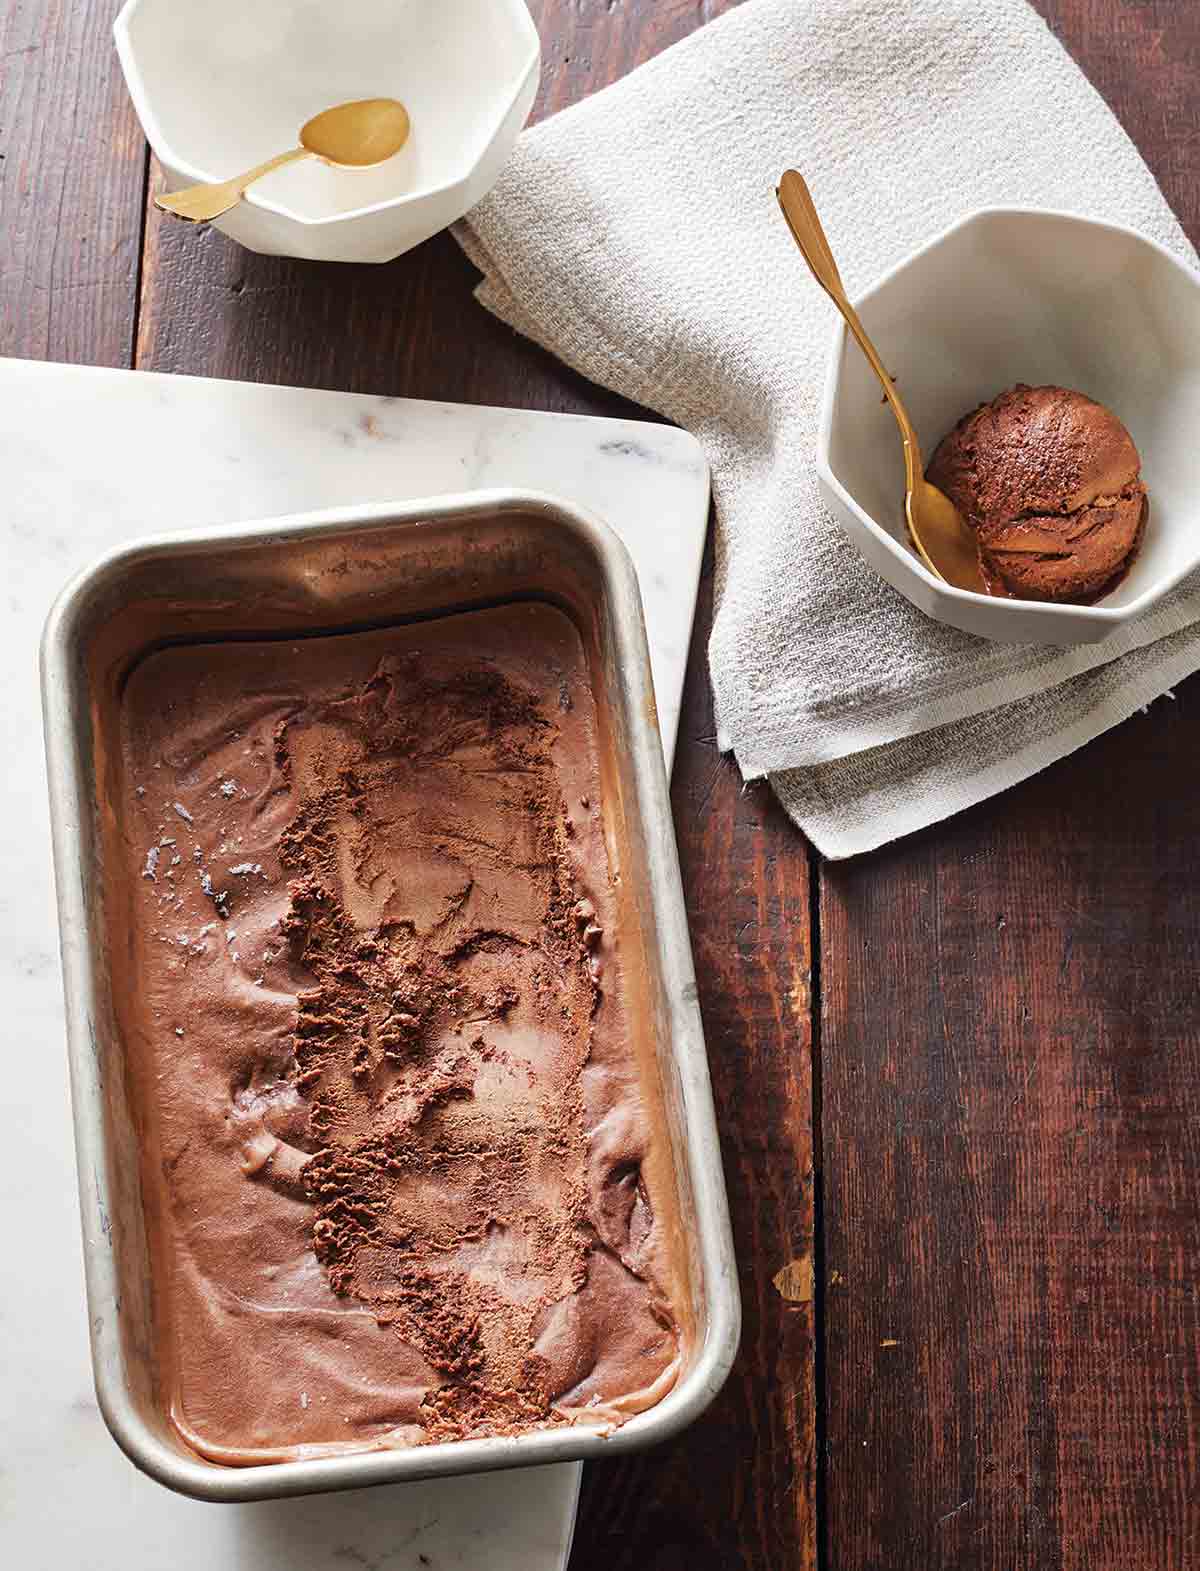 A metal dish filled with vegan chocolate fudge swirl ice cream, as well as two bowls with gold spoons, one empty and one with a scoop of ice cream.